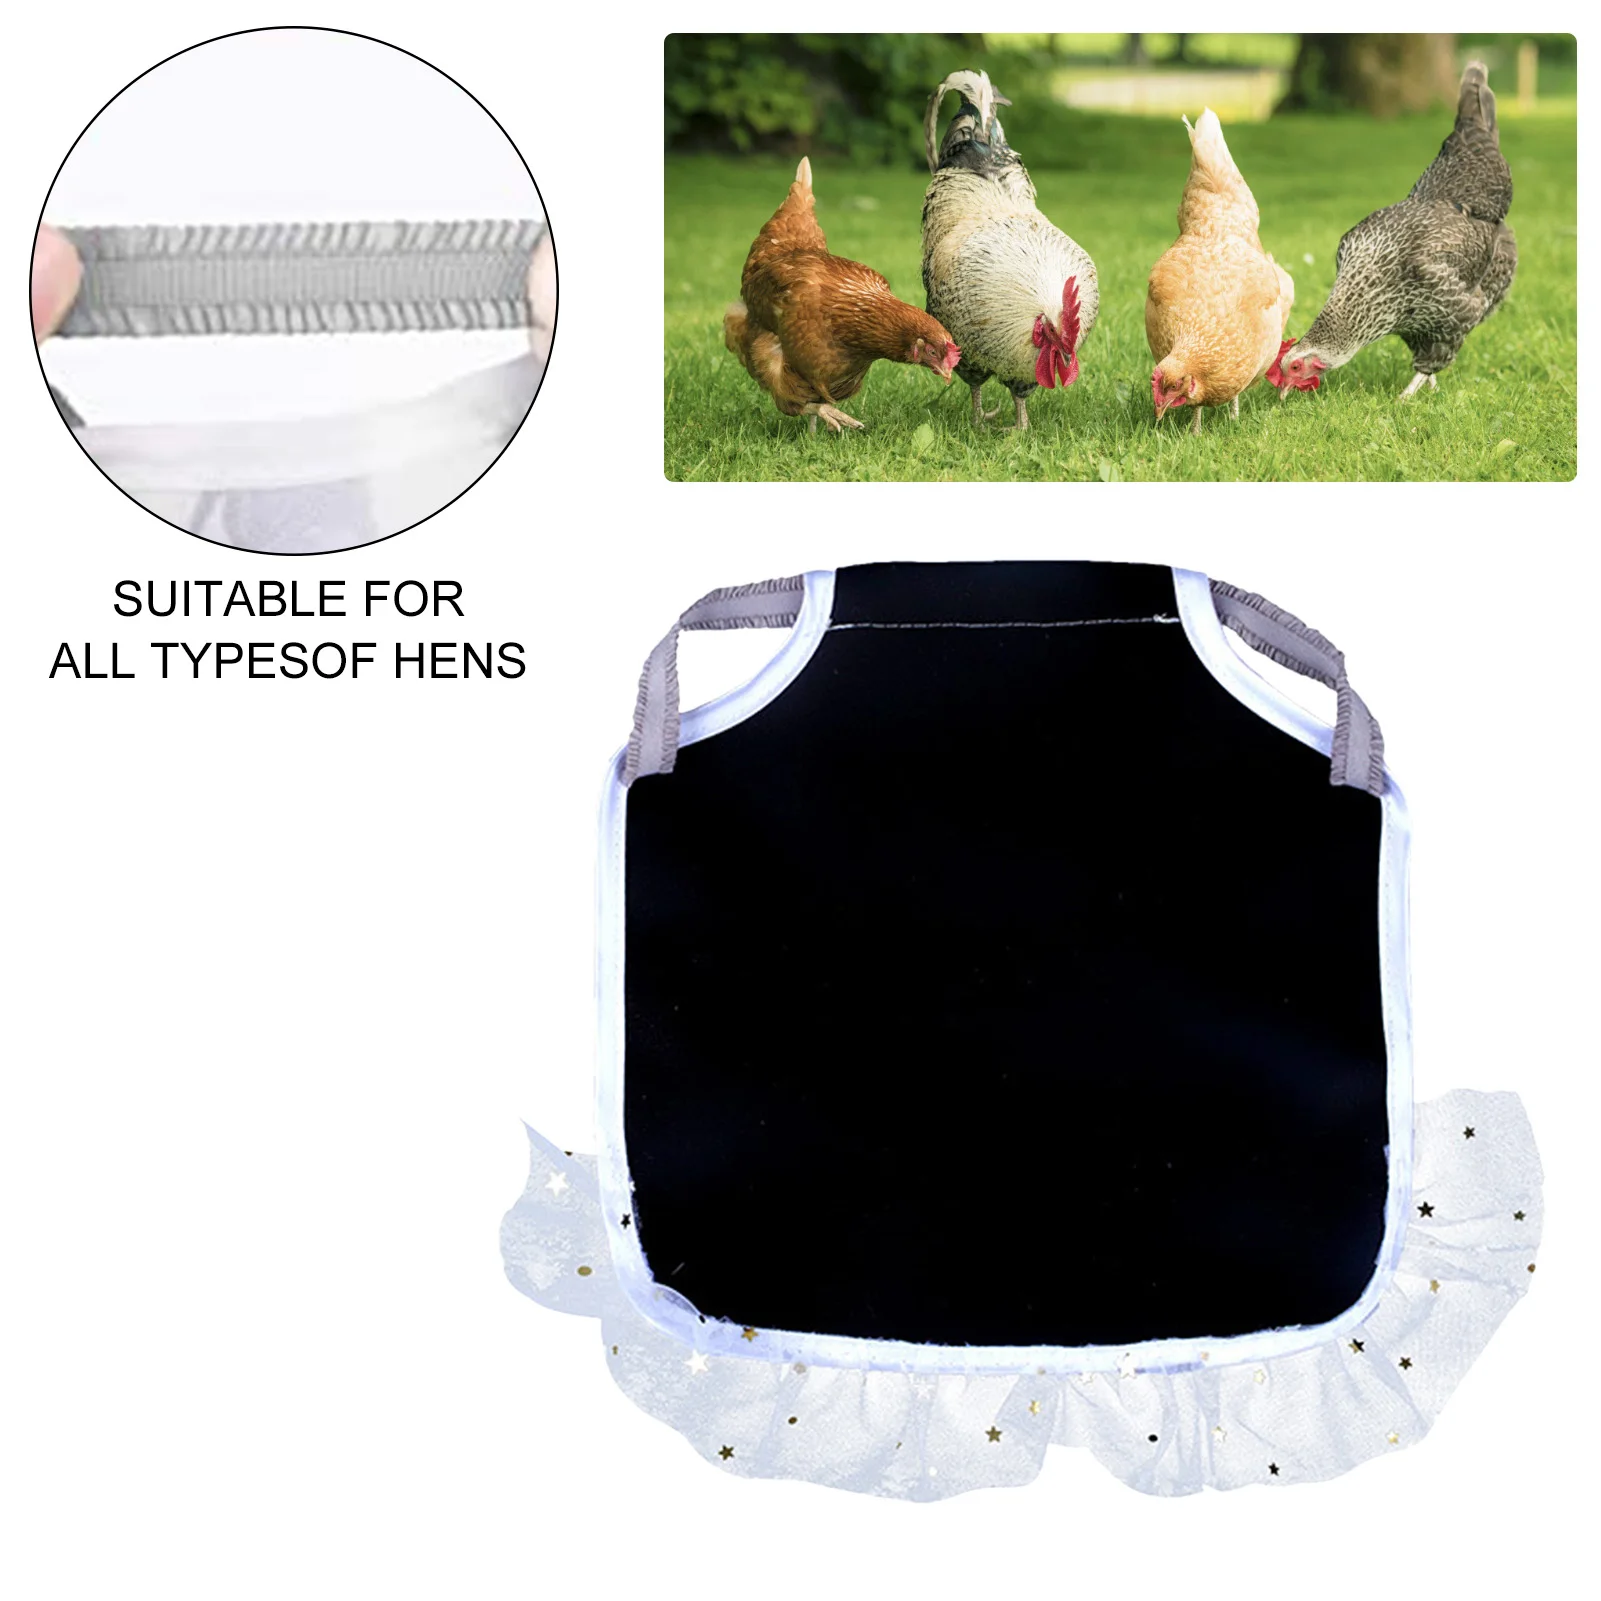 2 ULTRA DELUXE Chicken Saddle Apron Hen Jacket WING BACK SHOULDER TAIL POULTRY 